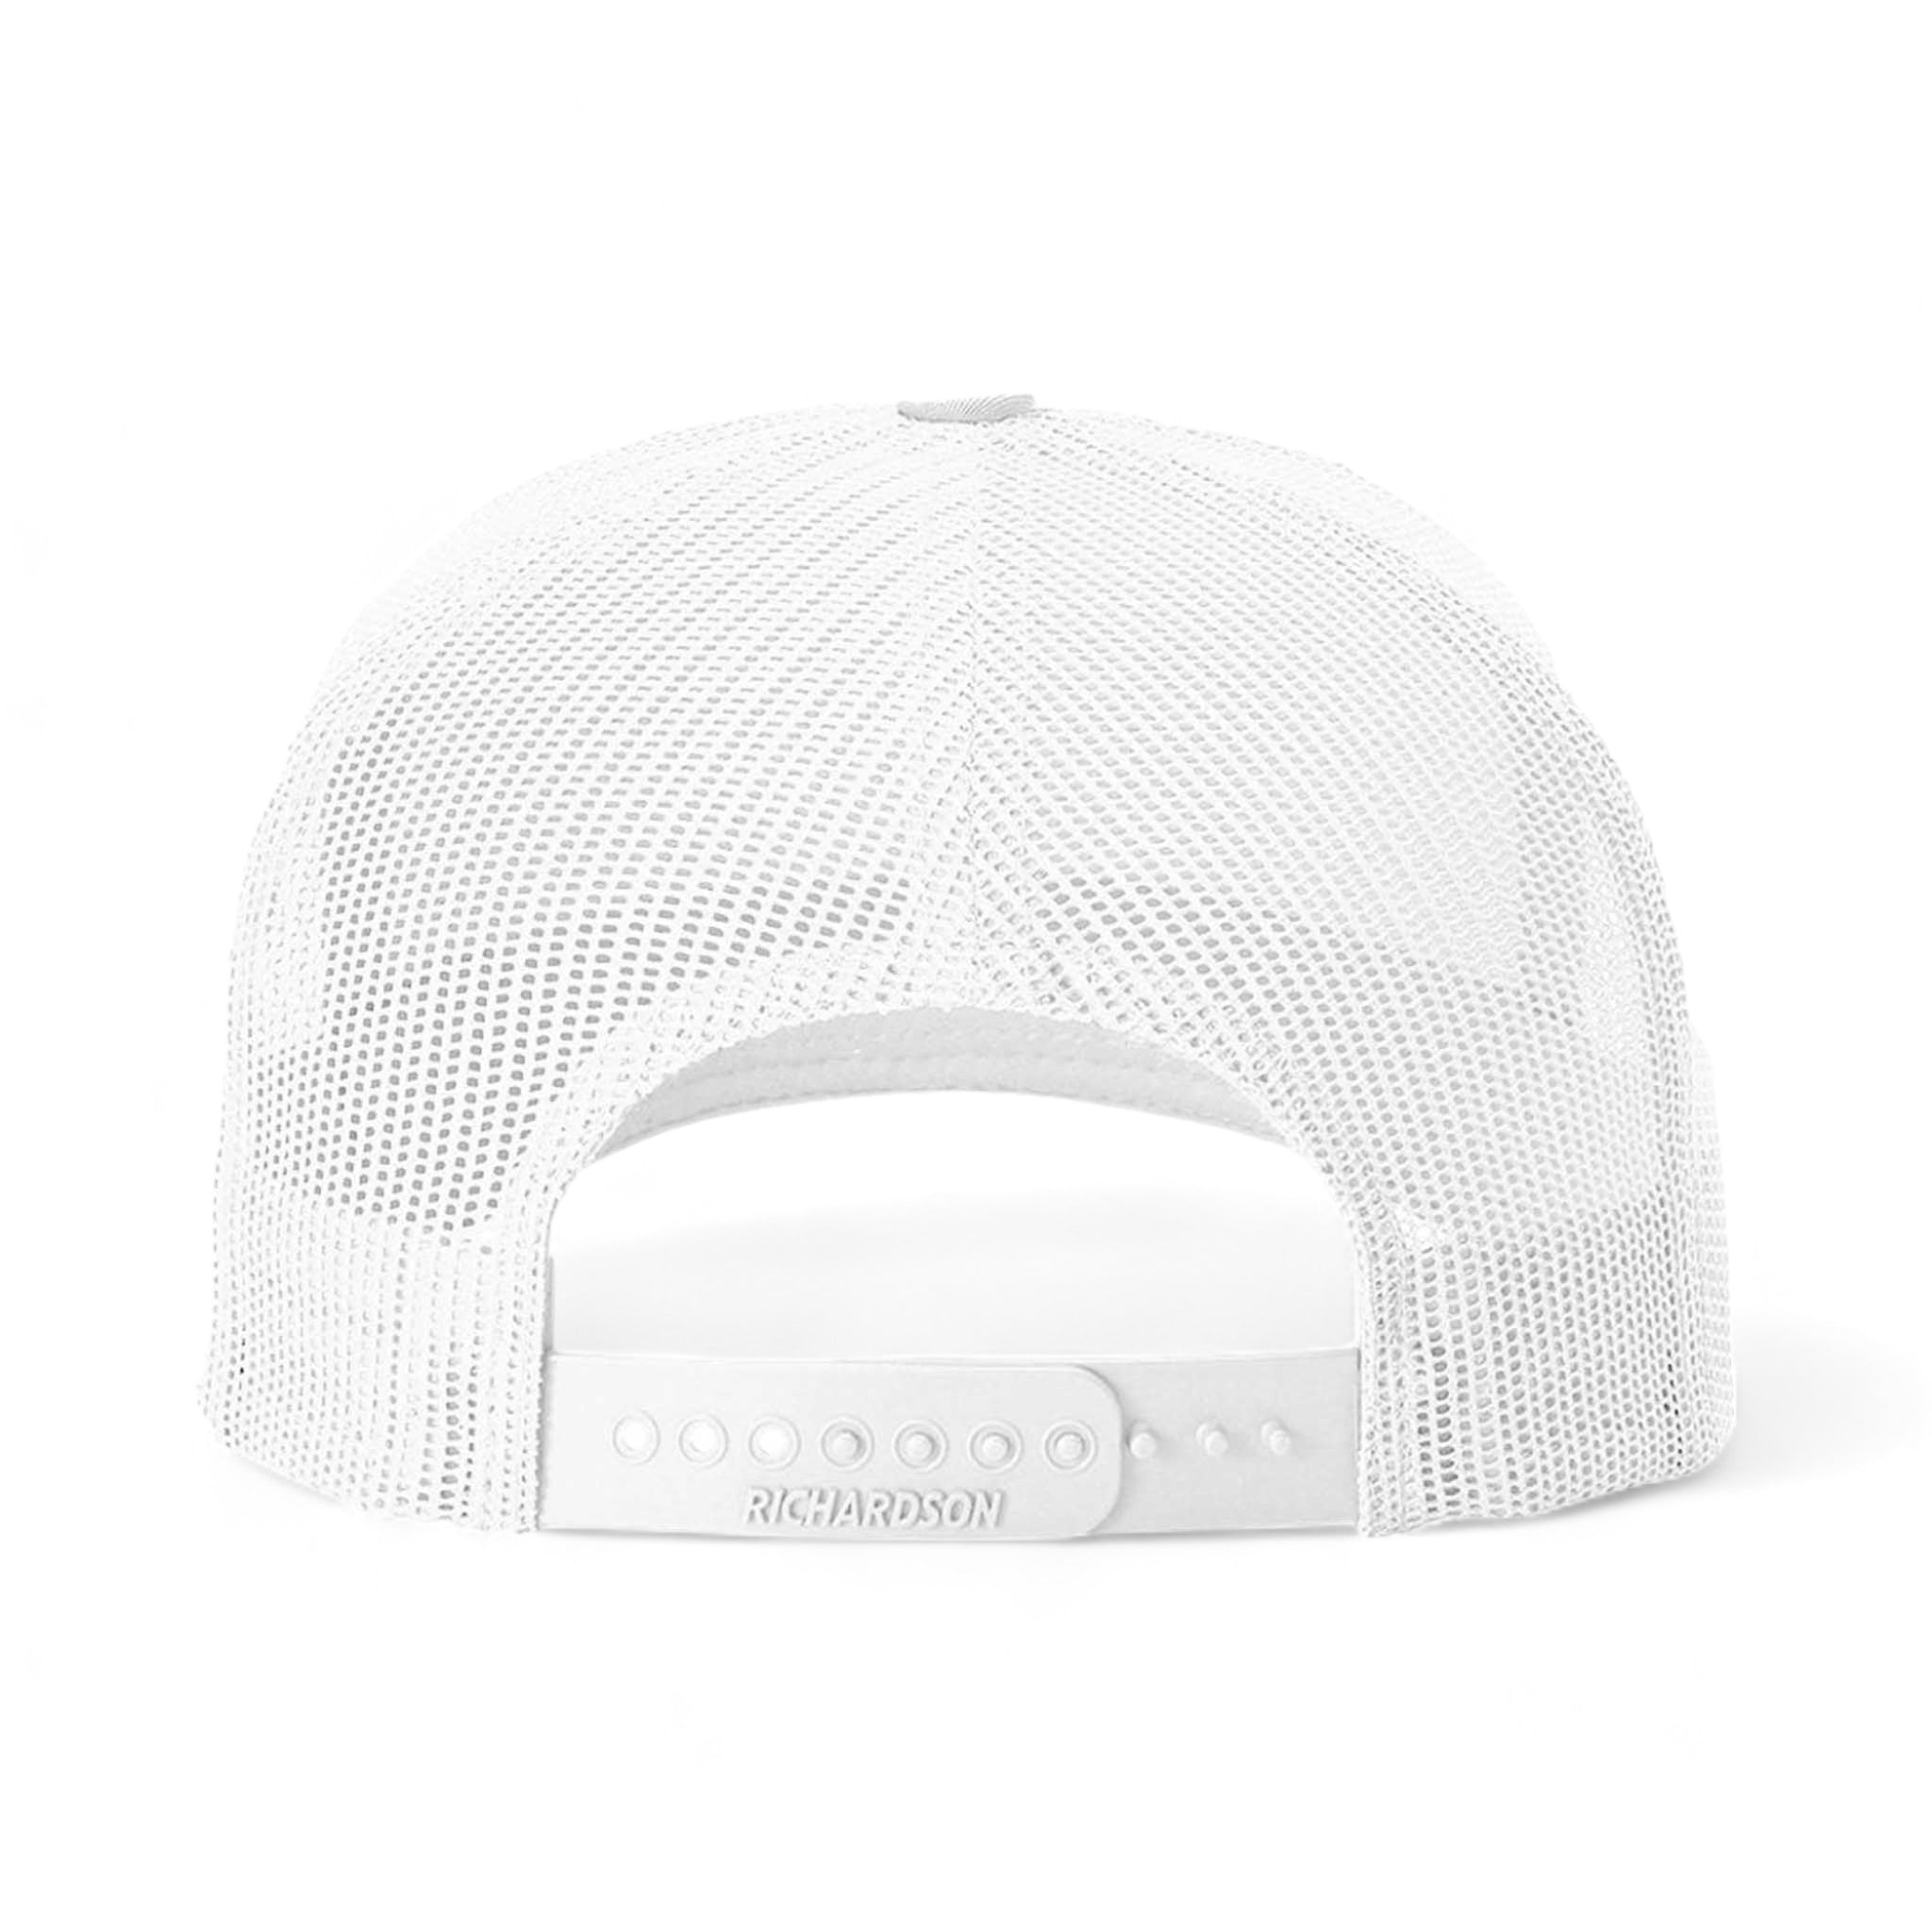 Back view of Richardson 112FPR custom hat in white and black